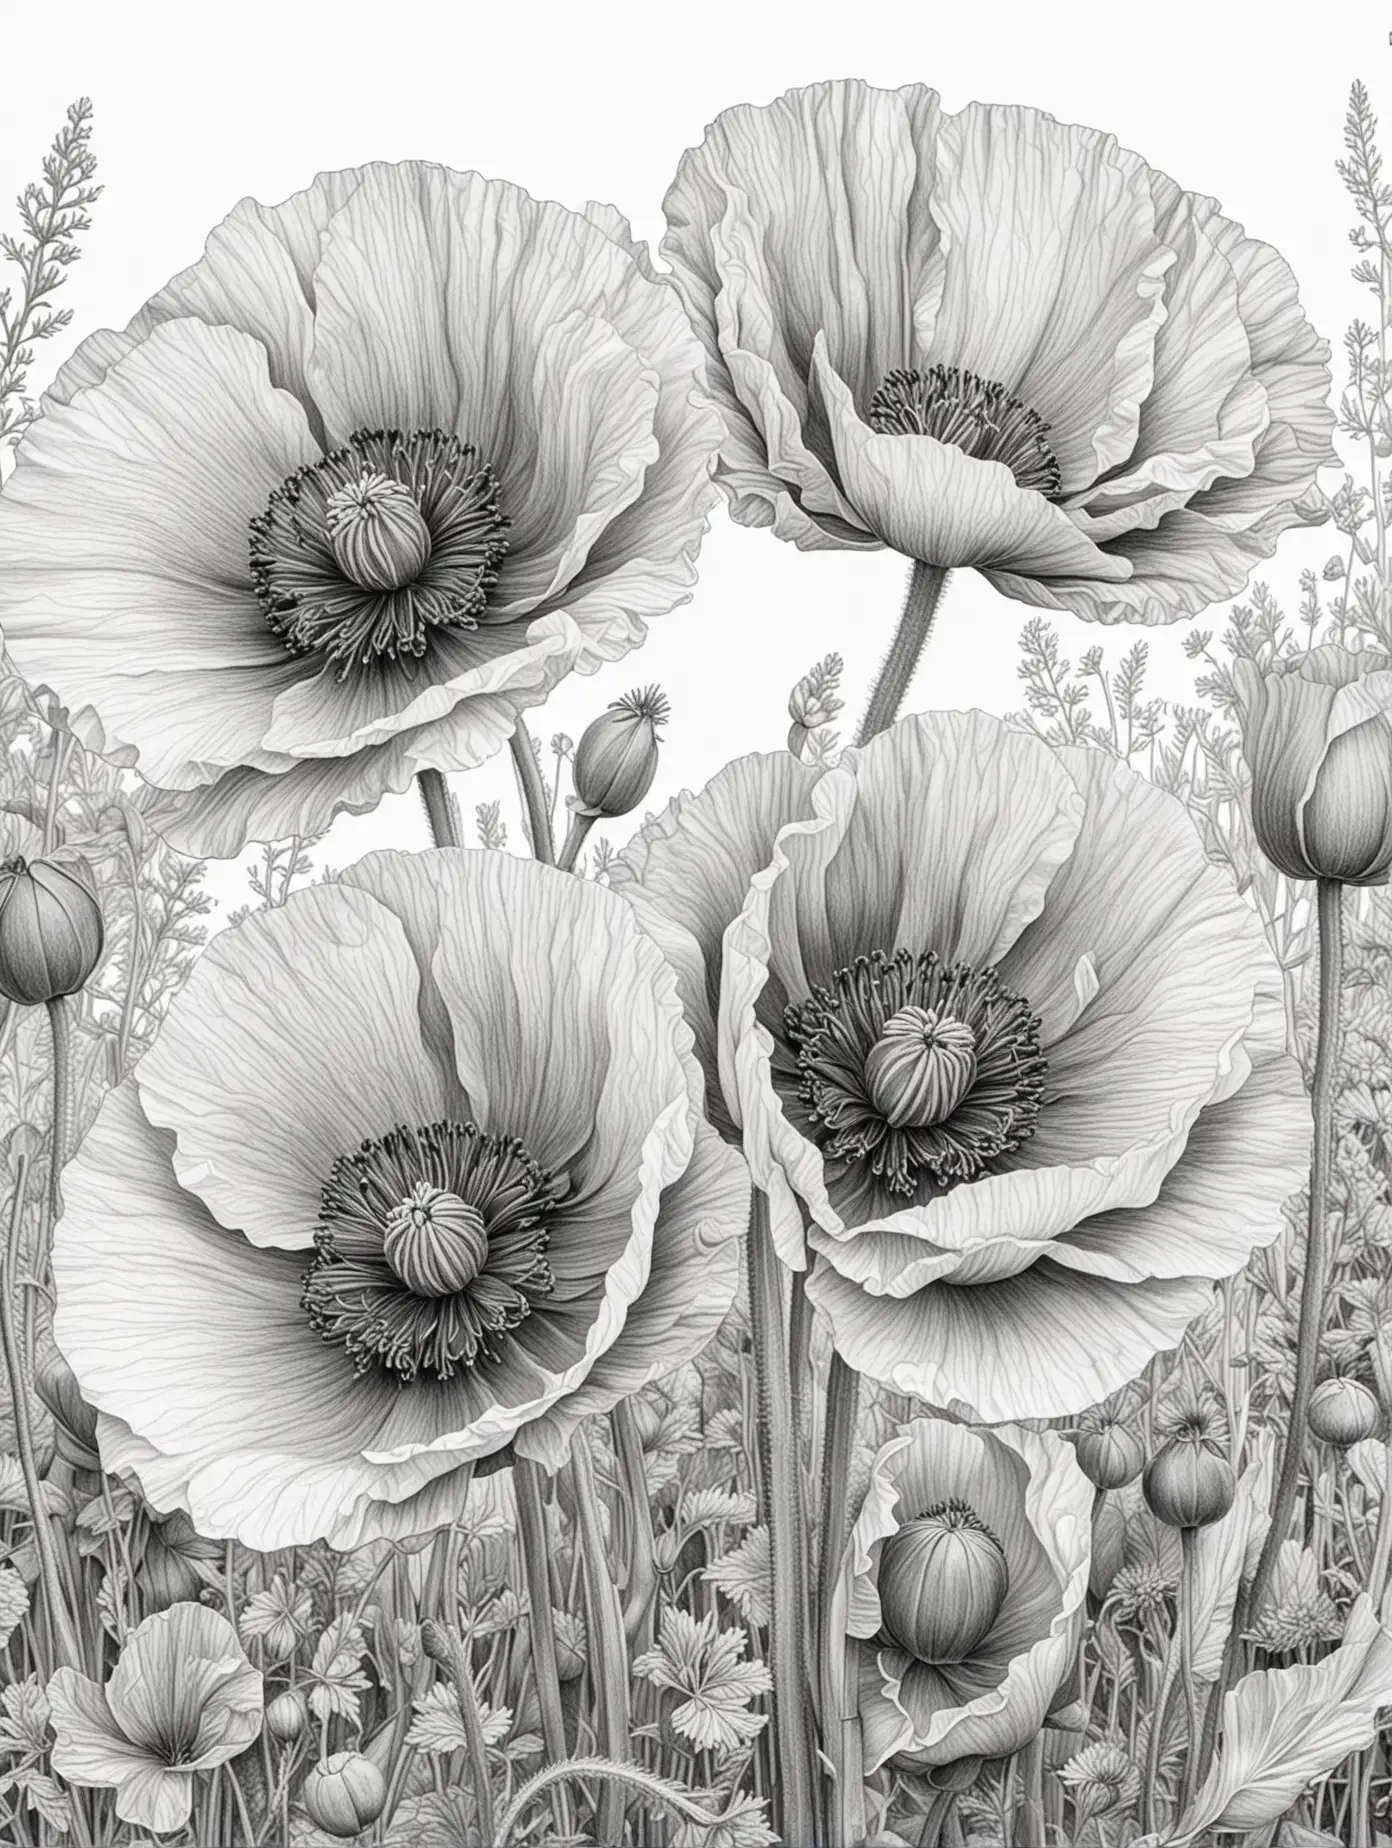 Exquisite Botanical Pencil Drawing of Poppies for Adult Coloring Book Transparent Background